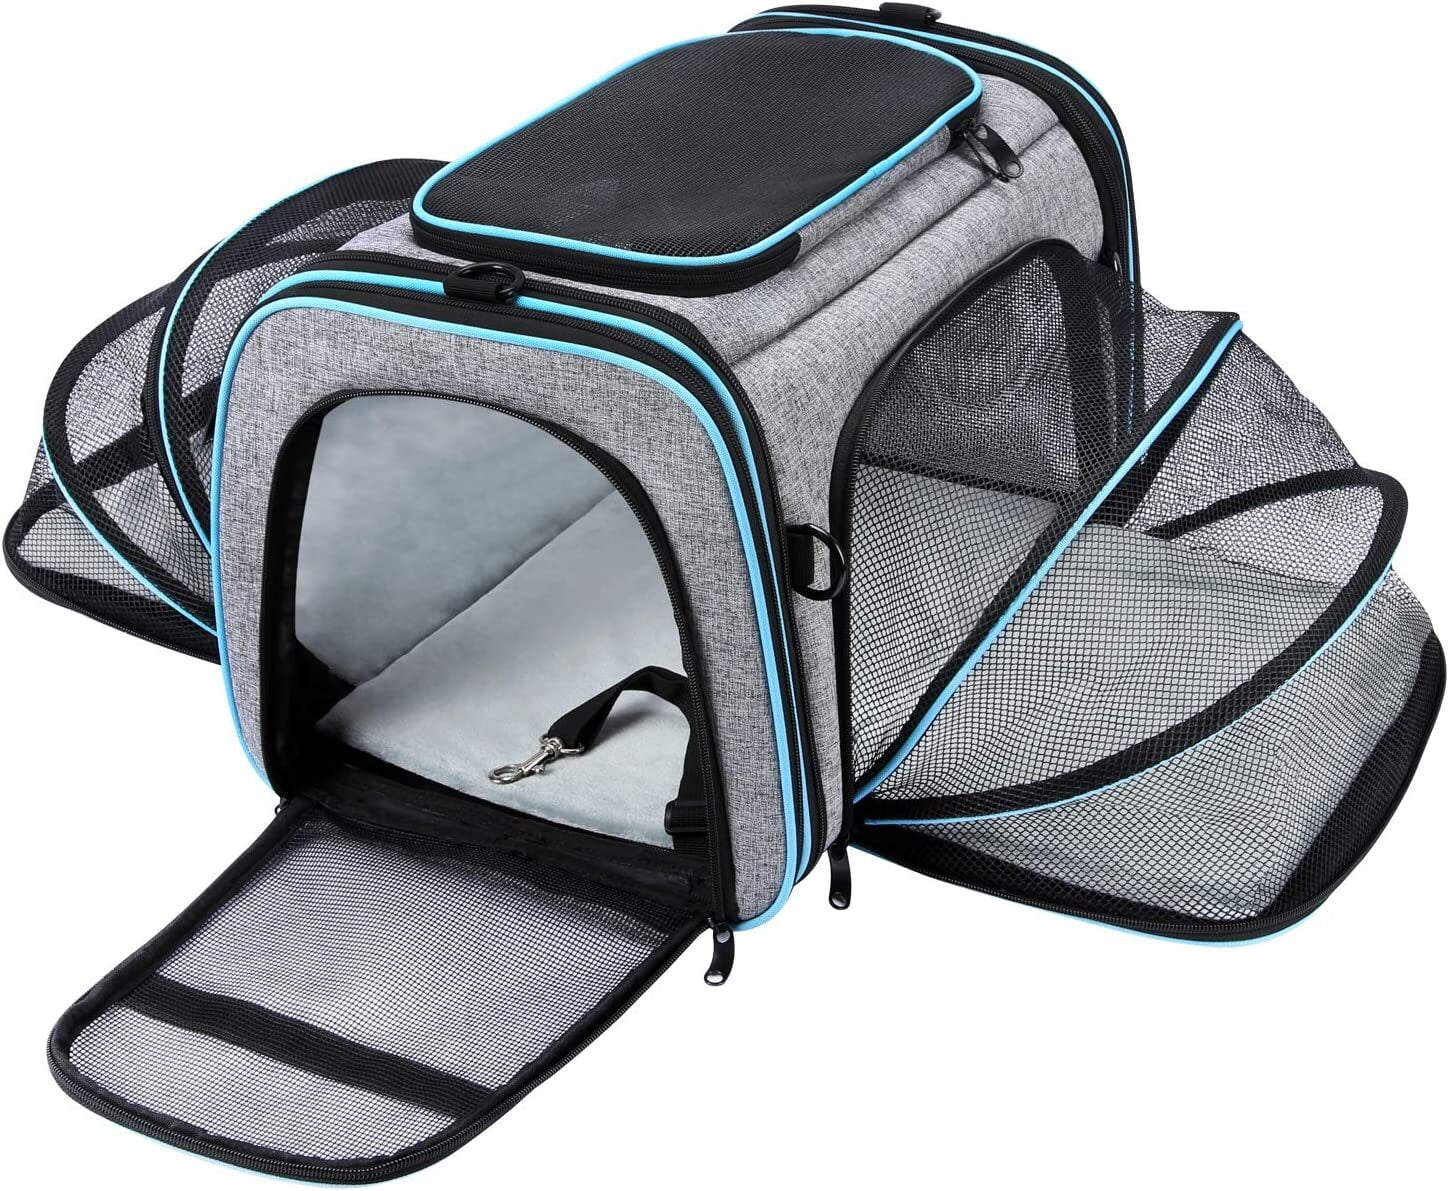 JMOON Cat Carrier Soft-Sided Airline Approved Pet Carrier Bag –  meowtreatyourcat